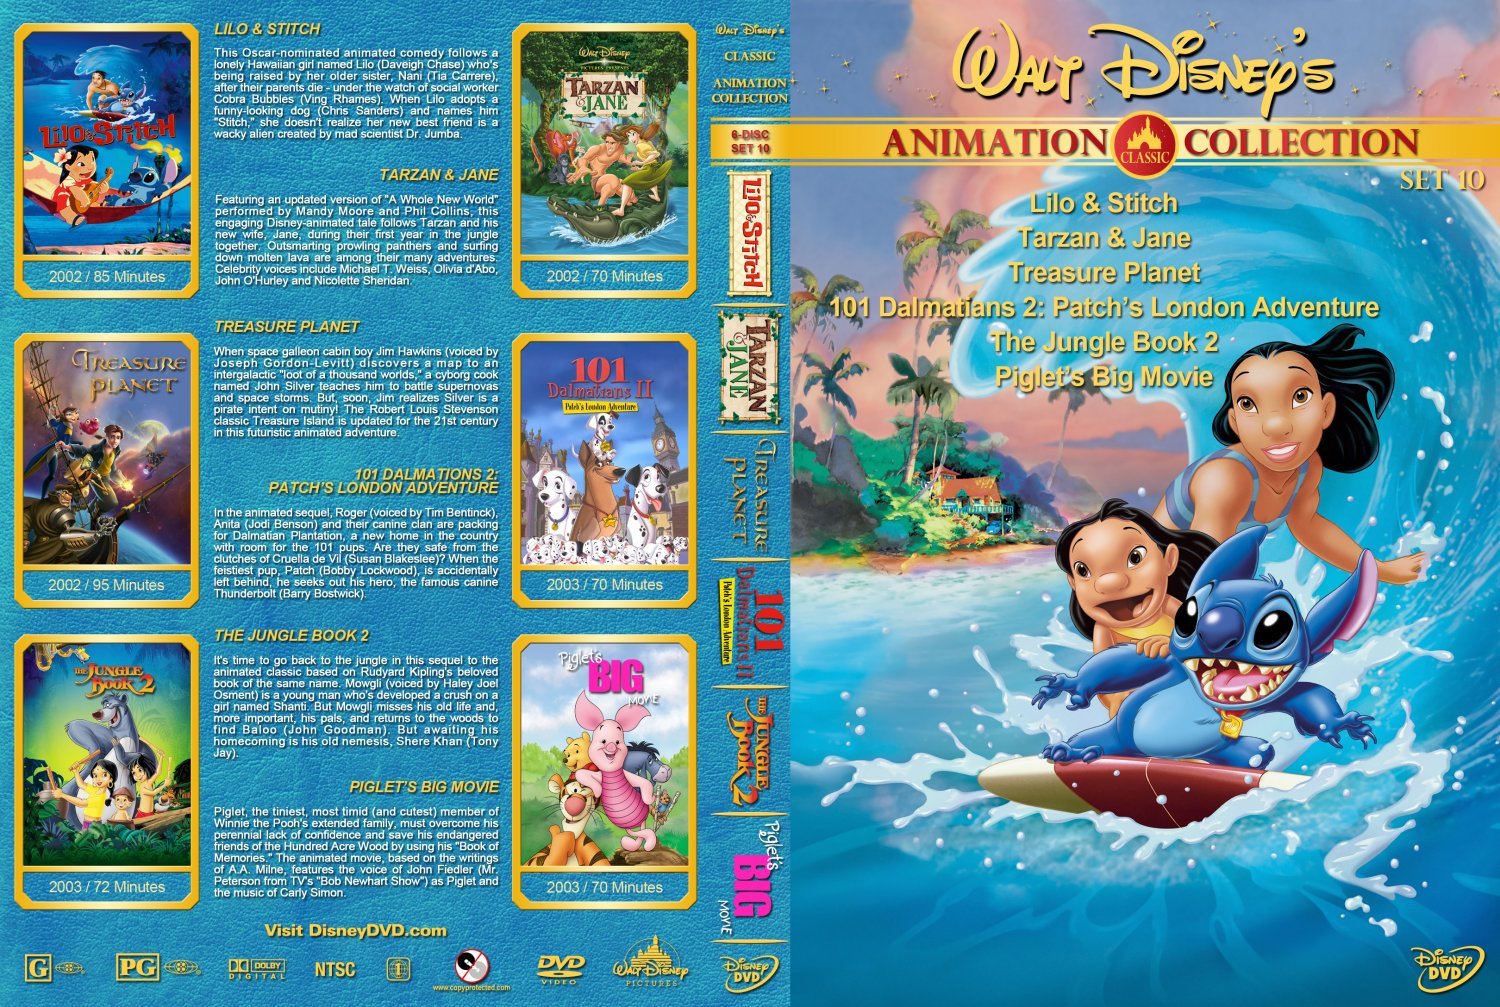 Walt Disney’s Classic Animation Collection Set 10 | Dvd Covers and Labels